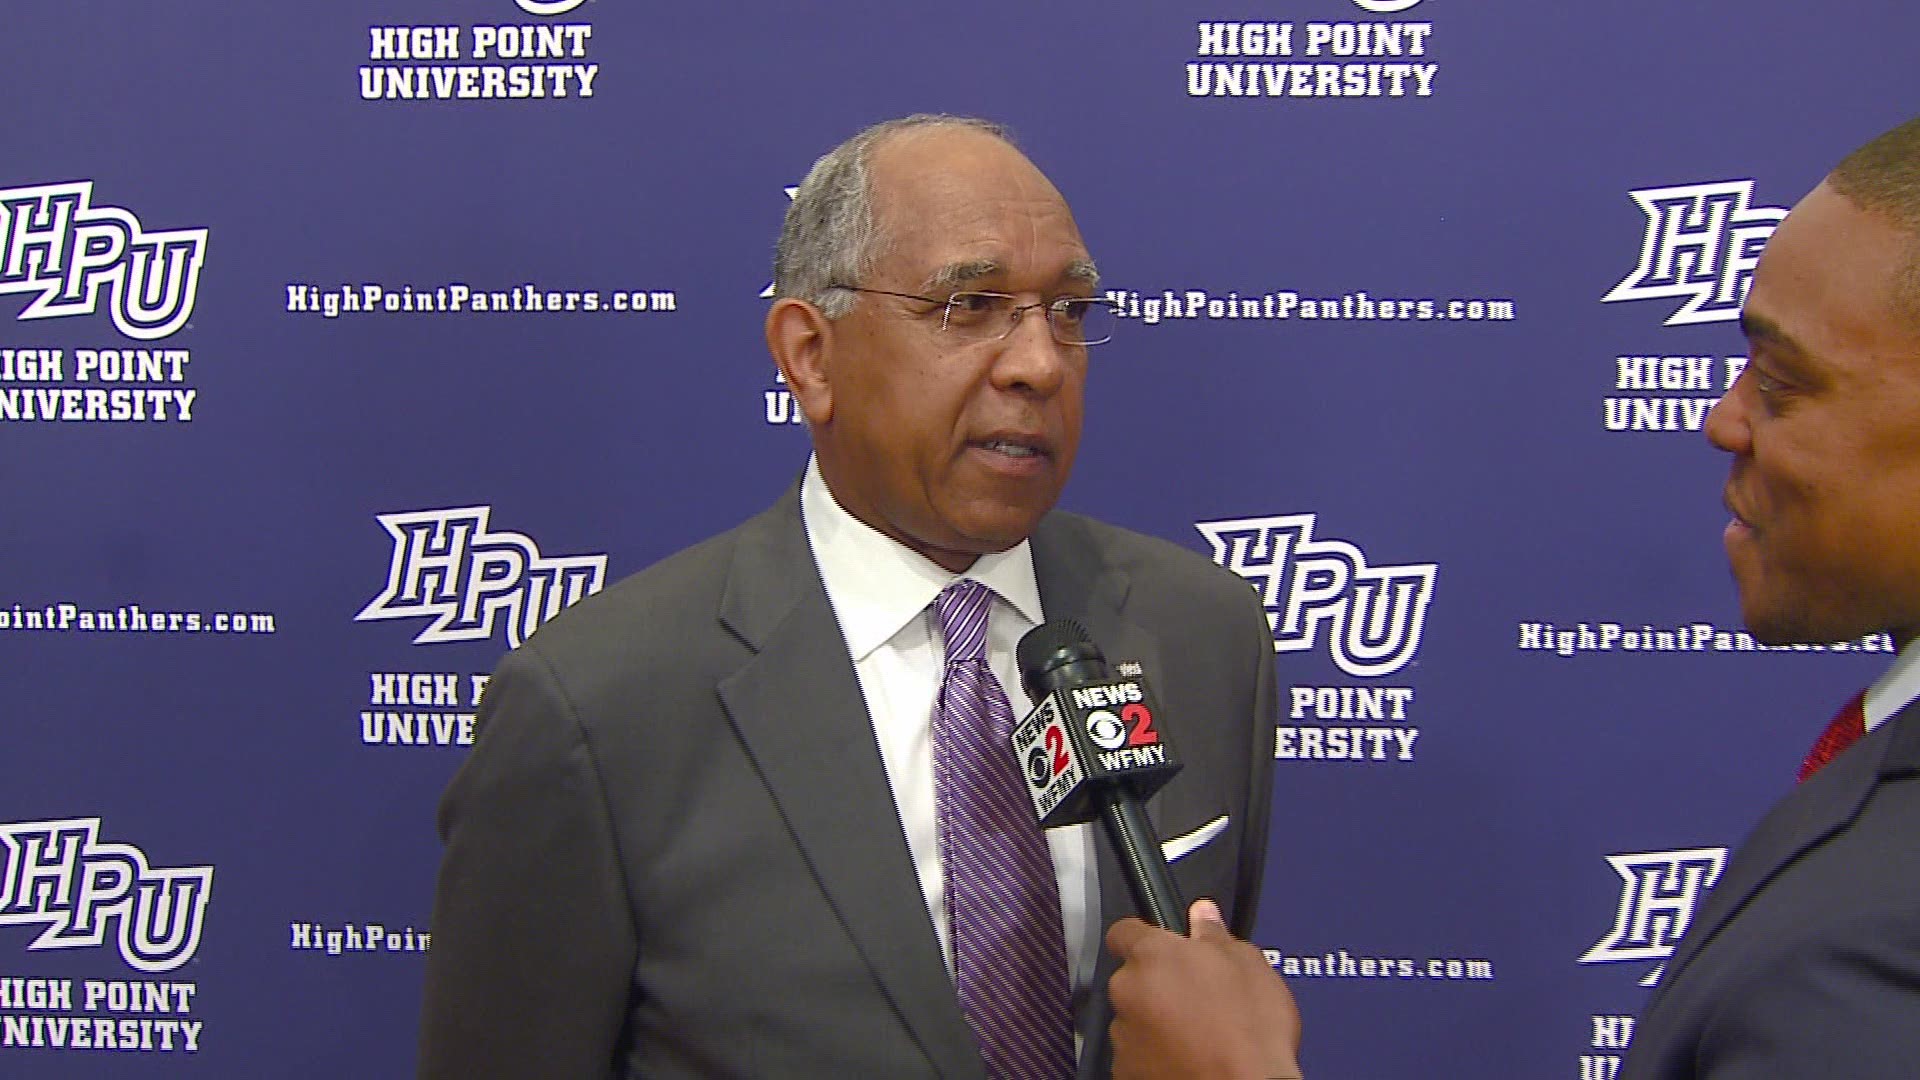 WFMY News 2's Patrick Wright Interviews New High Point Head Coach Tubby Smith